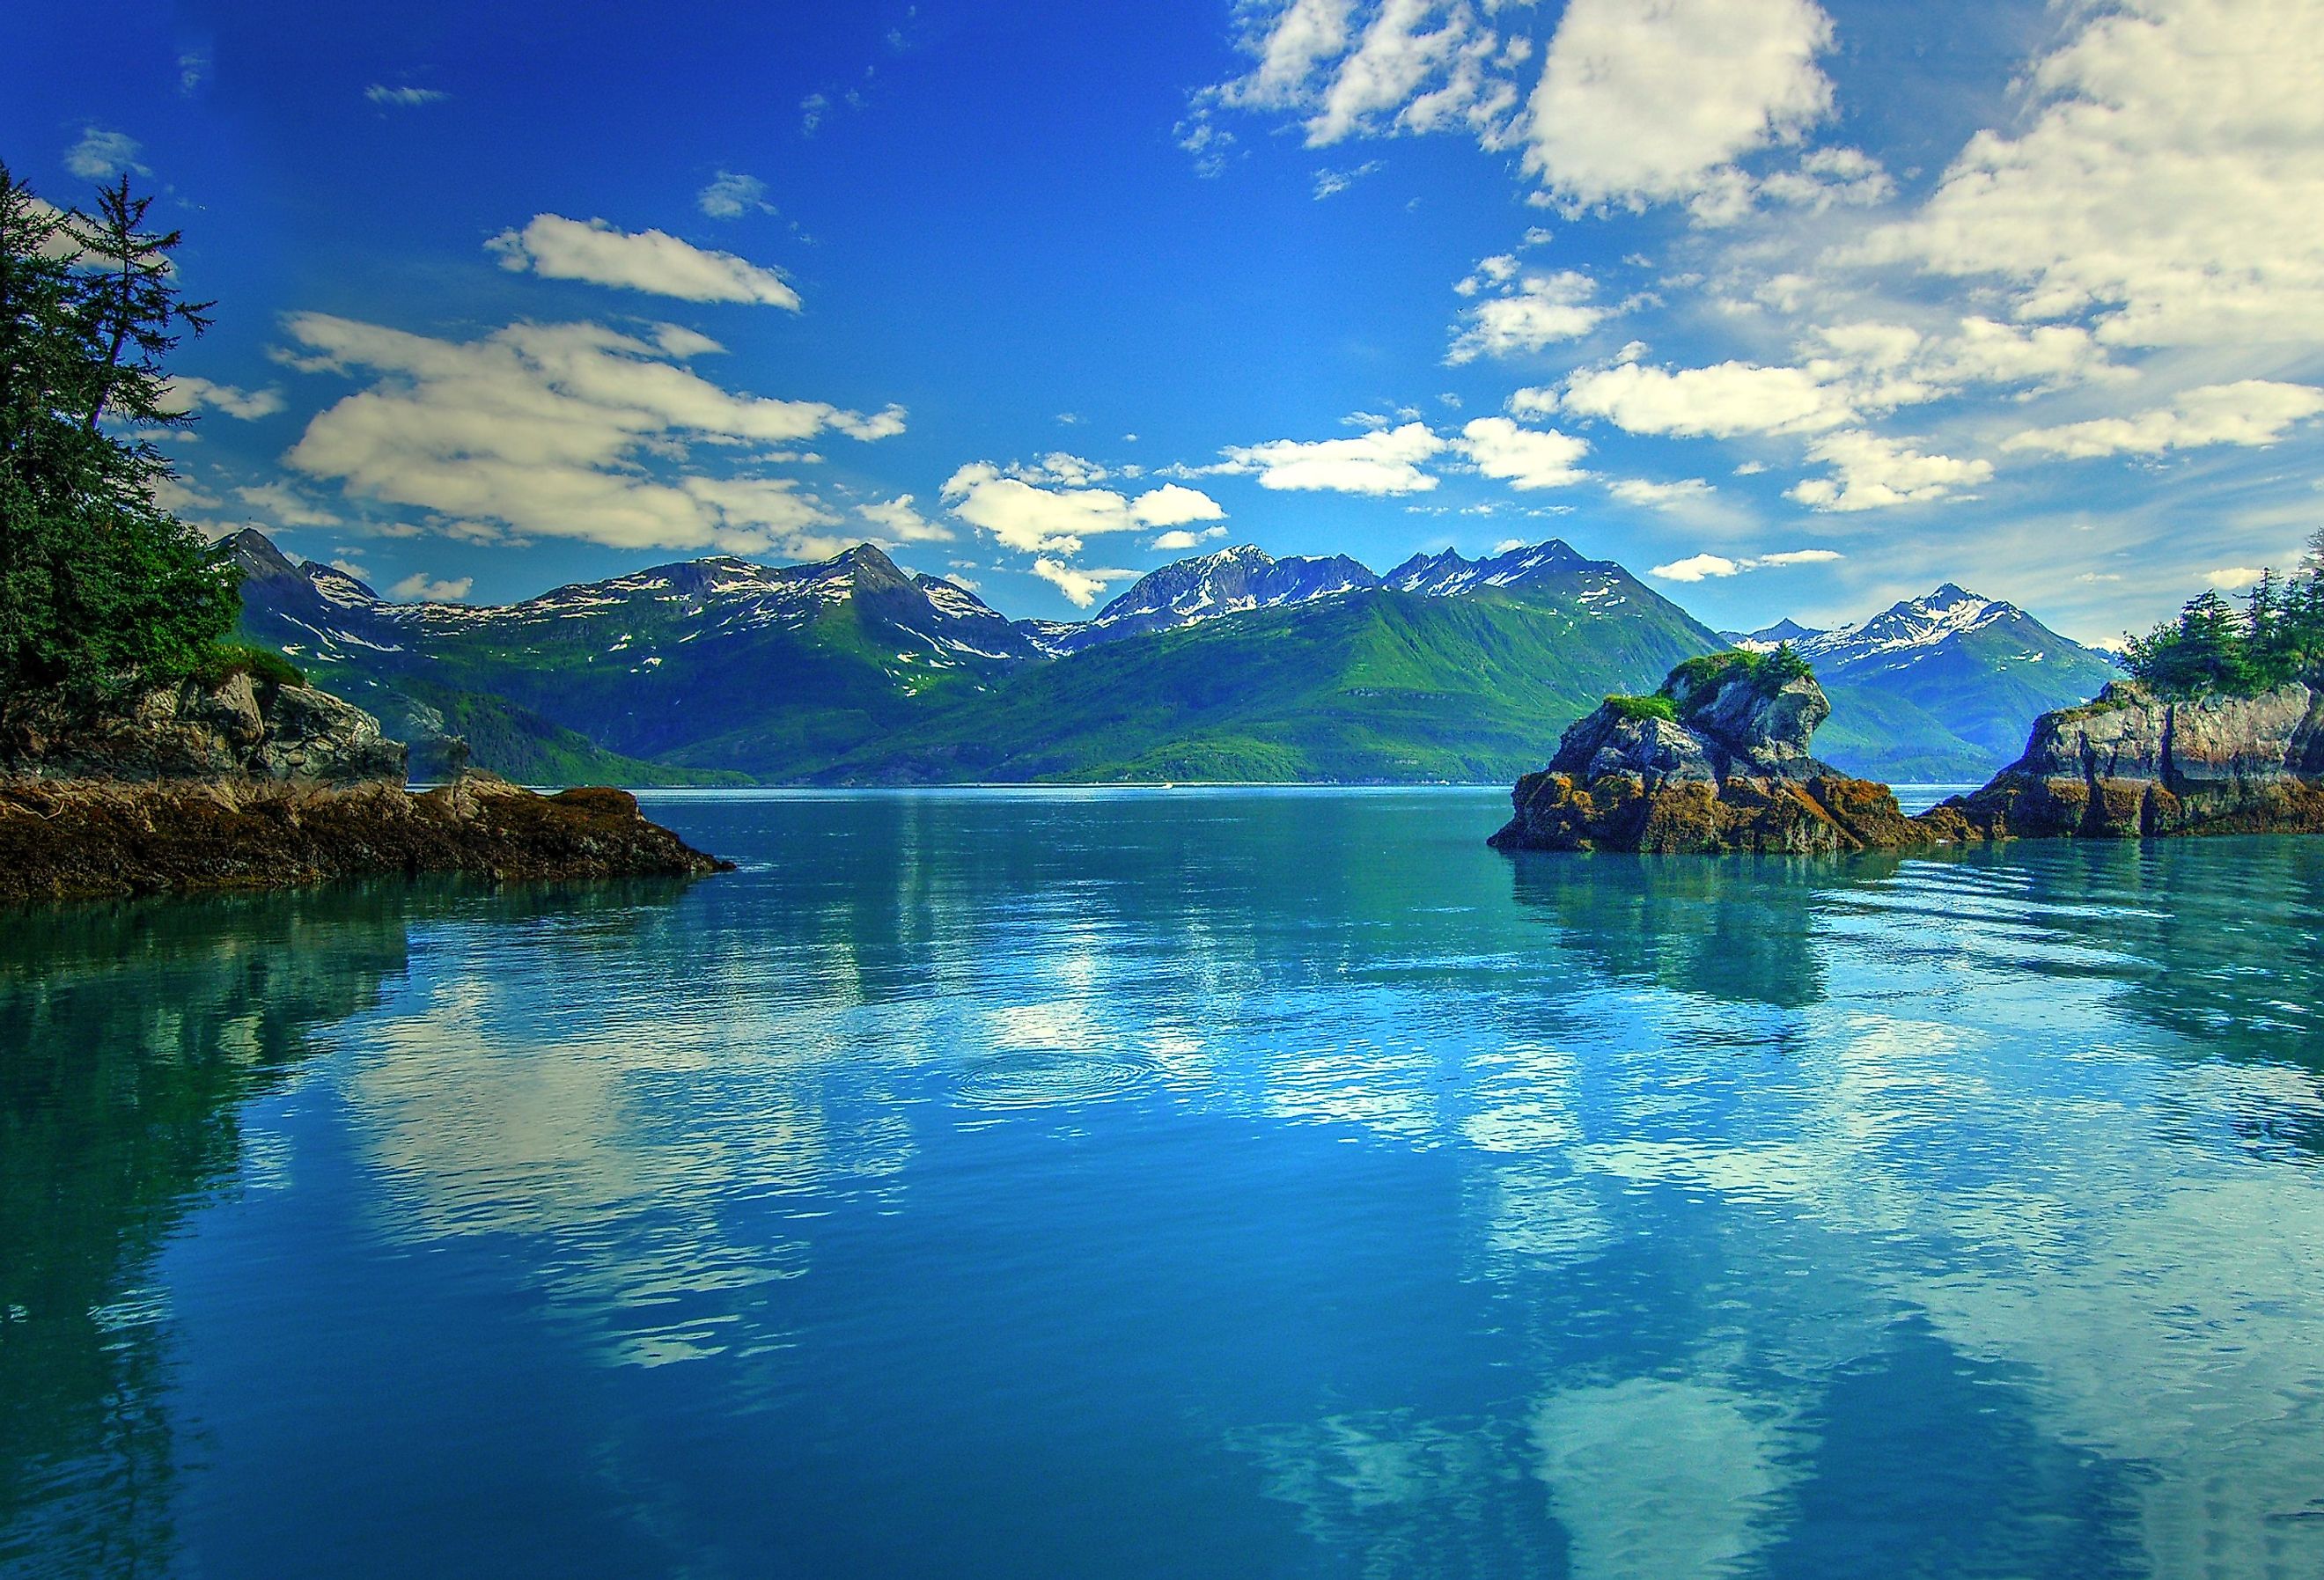 Prince William Sound, Valdez, Alaska. Reflection of clouds in the water with mountains in the background. Image credit Krishna.Wu via Shutterstock.